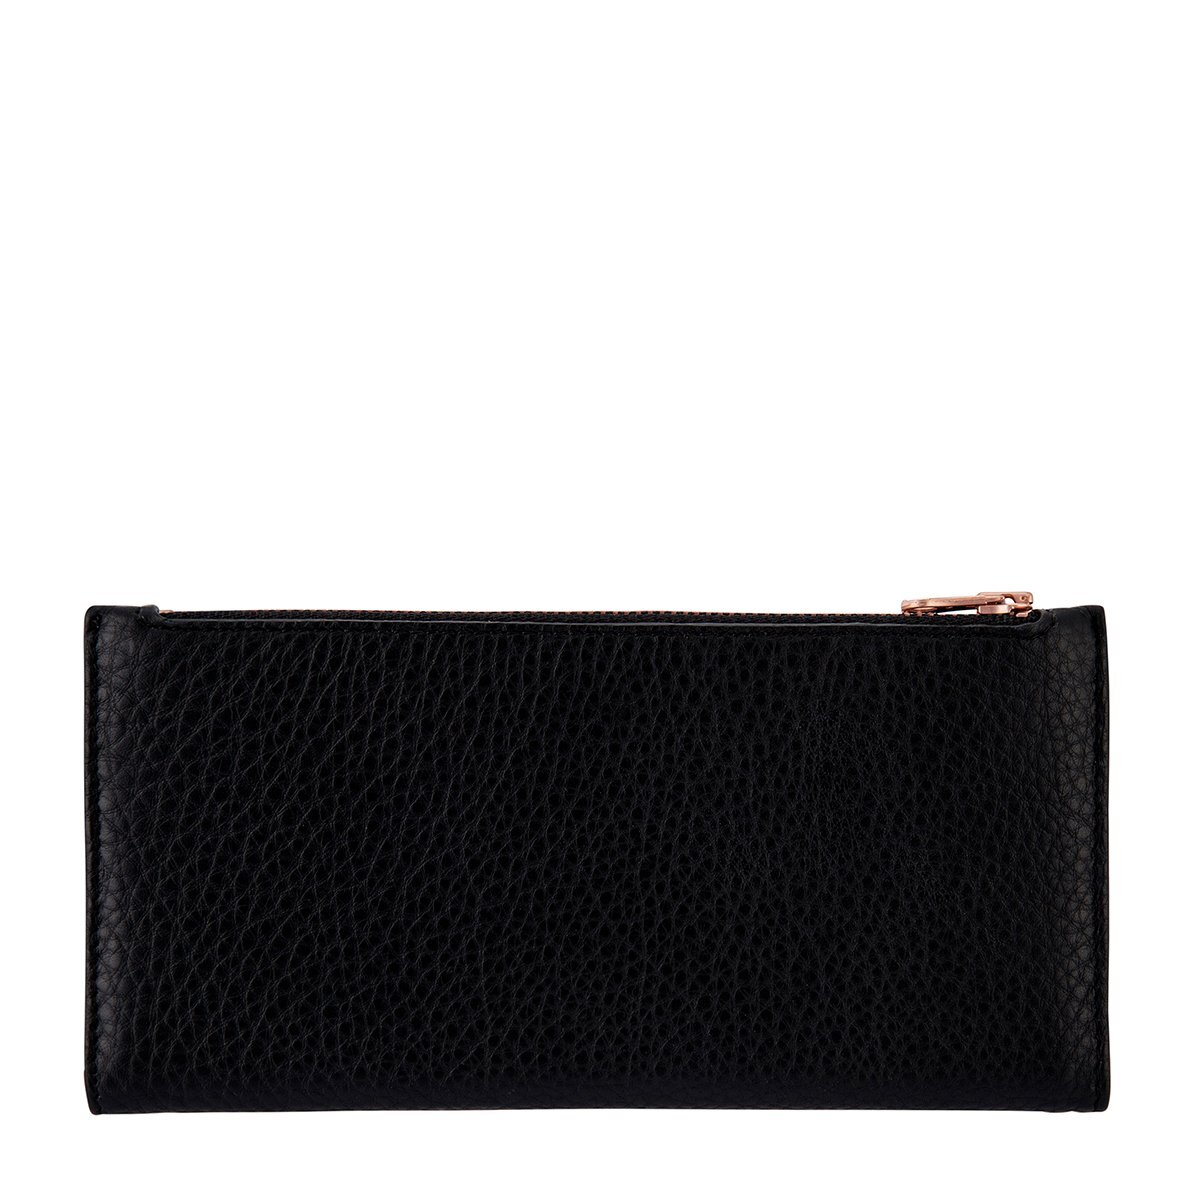 In The Beginning Wallet (Black) - Accessories-Bags / Wallets